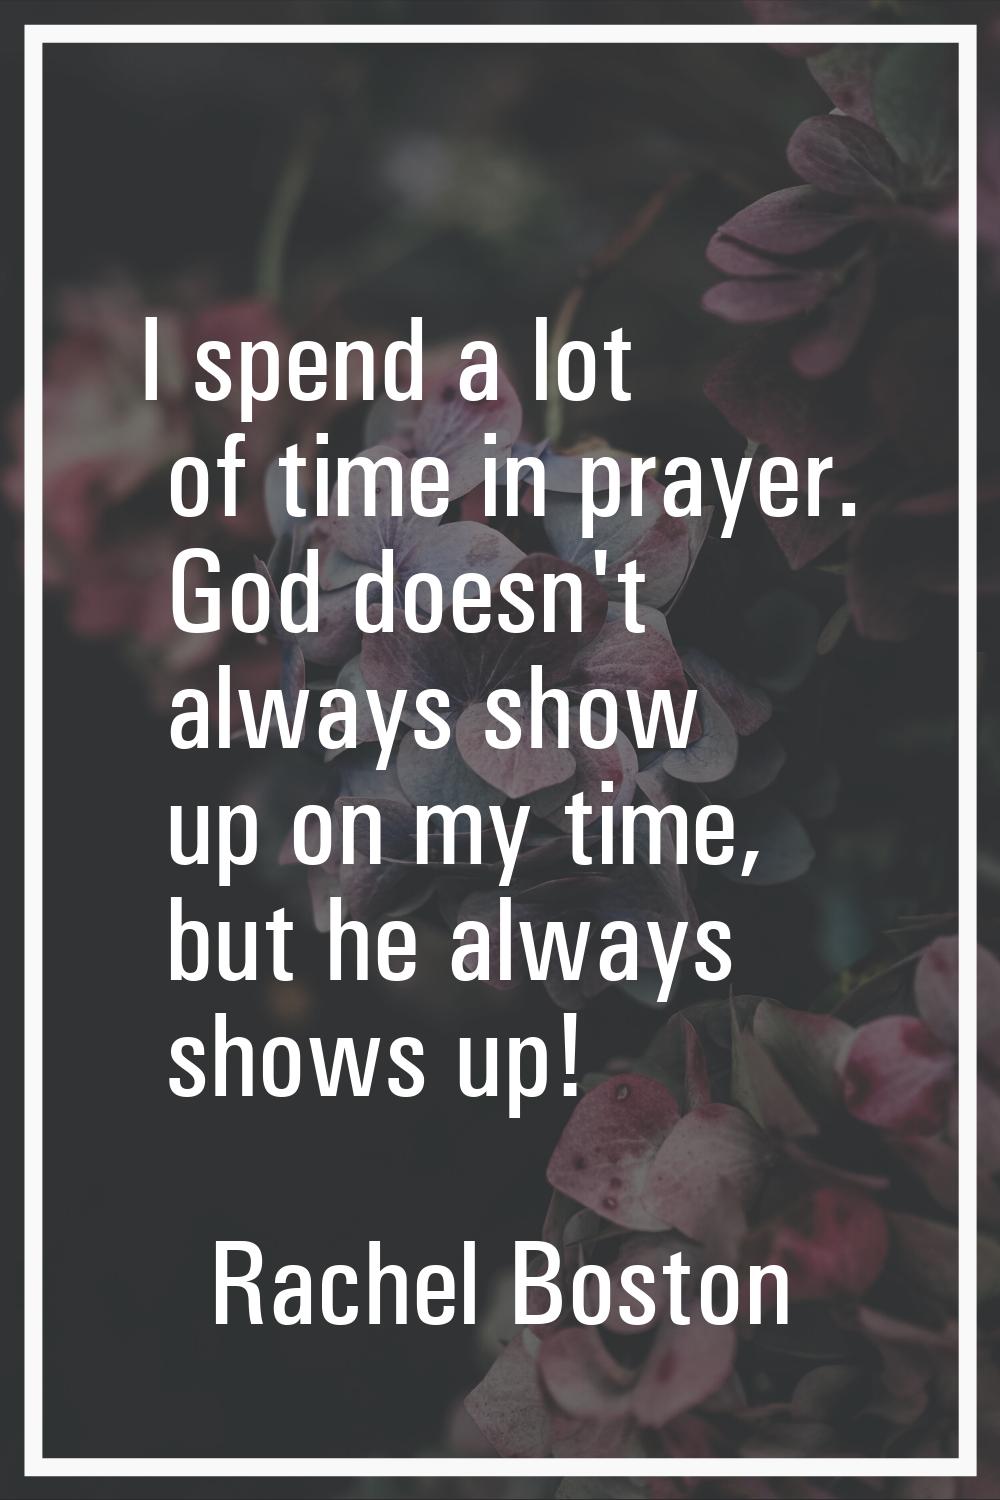 I spend a lot of time in prayer. God doesn't always show up on my time, but he always shows up!